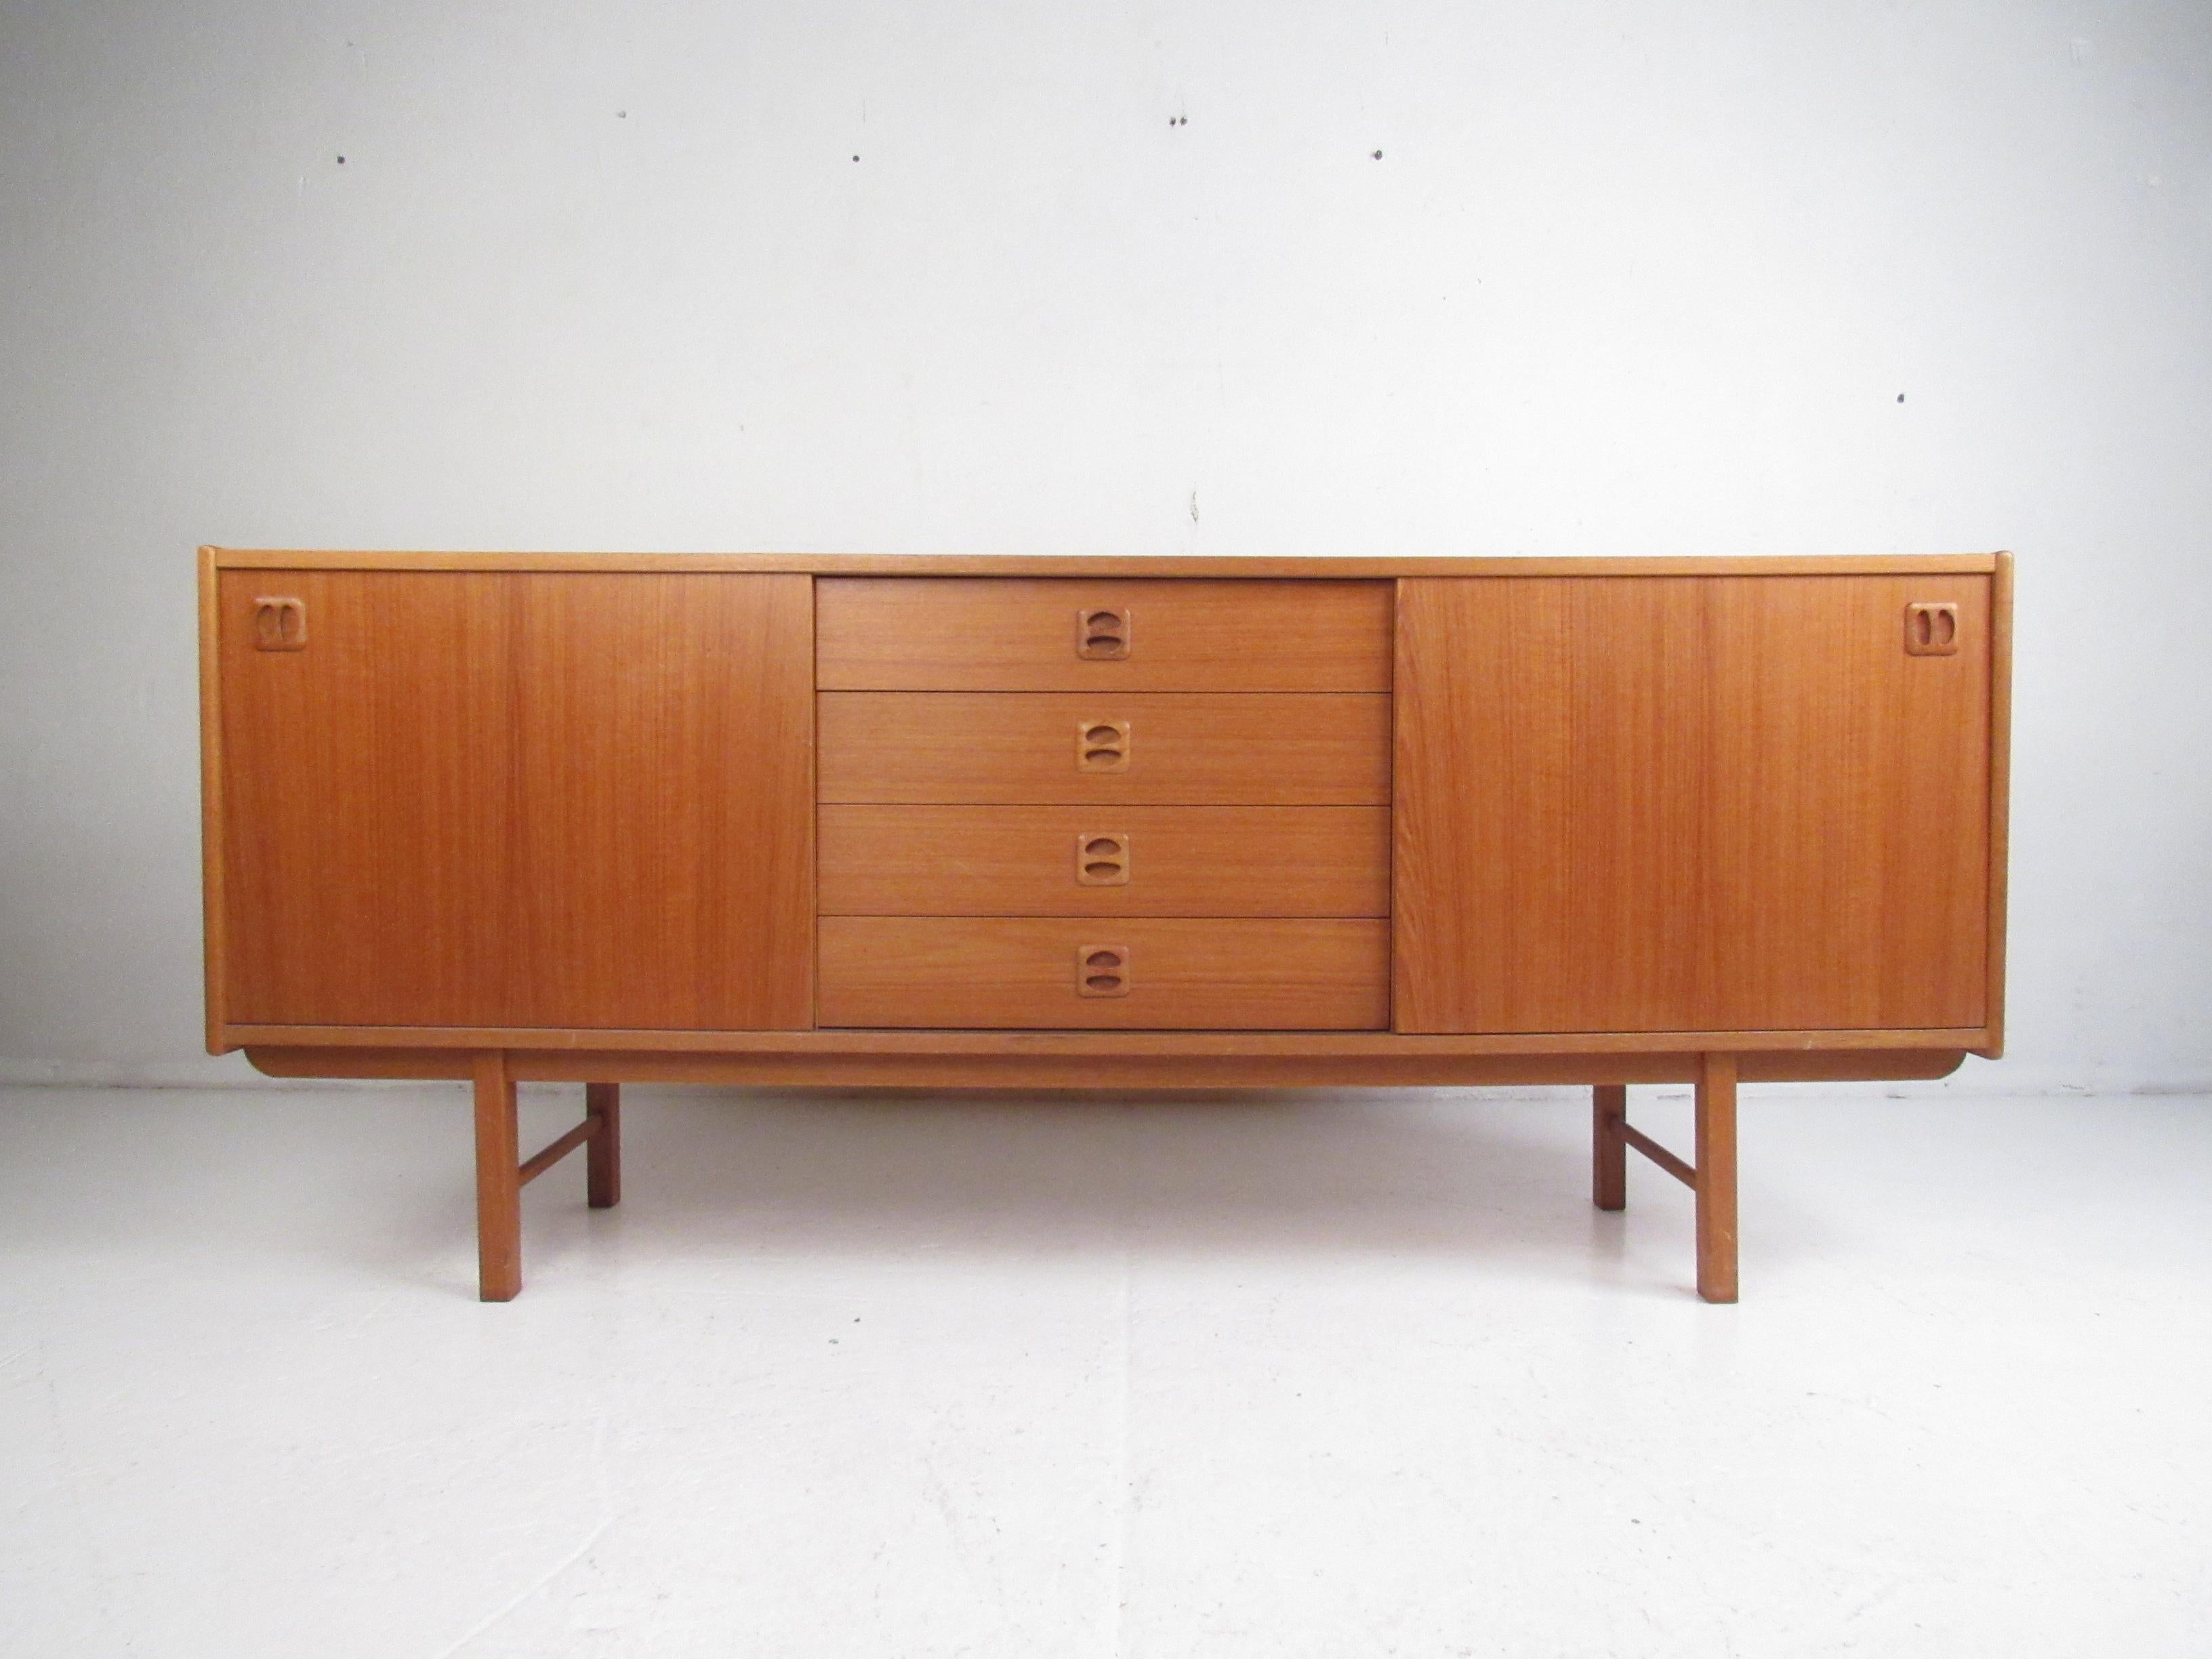 This beautiful vintage modern sideboard features two large compartments hidden by sliding doors and four hefty drawers in the center. An attractive Danish design with carved ellipse shaped pulls, a rich teak finish, and drawers with dovetailed